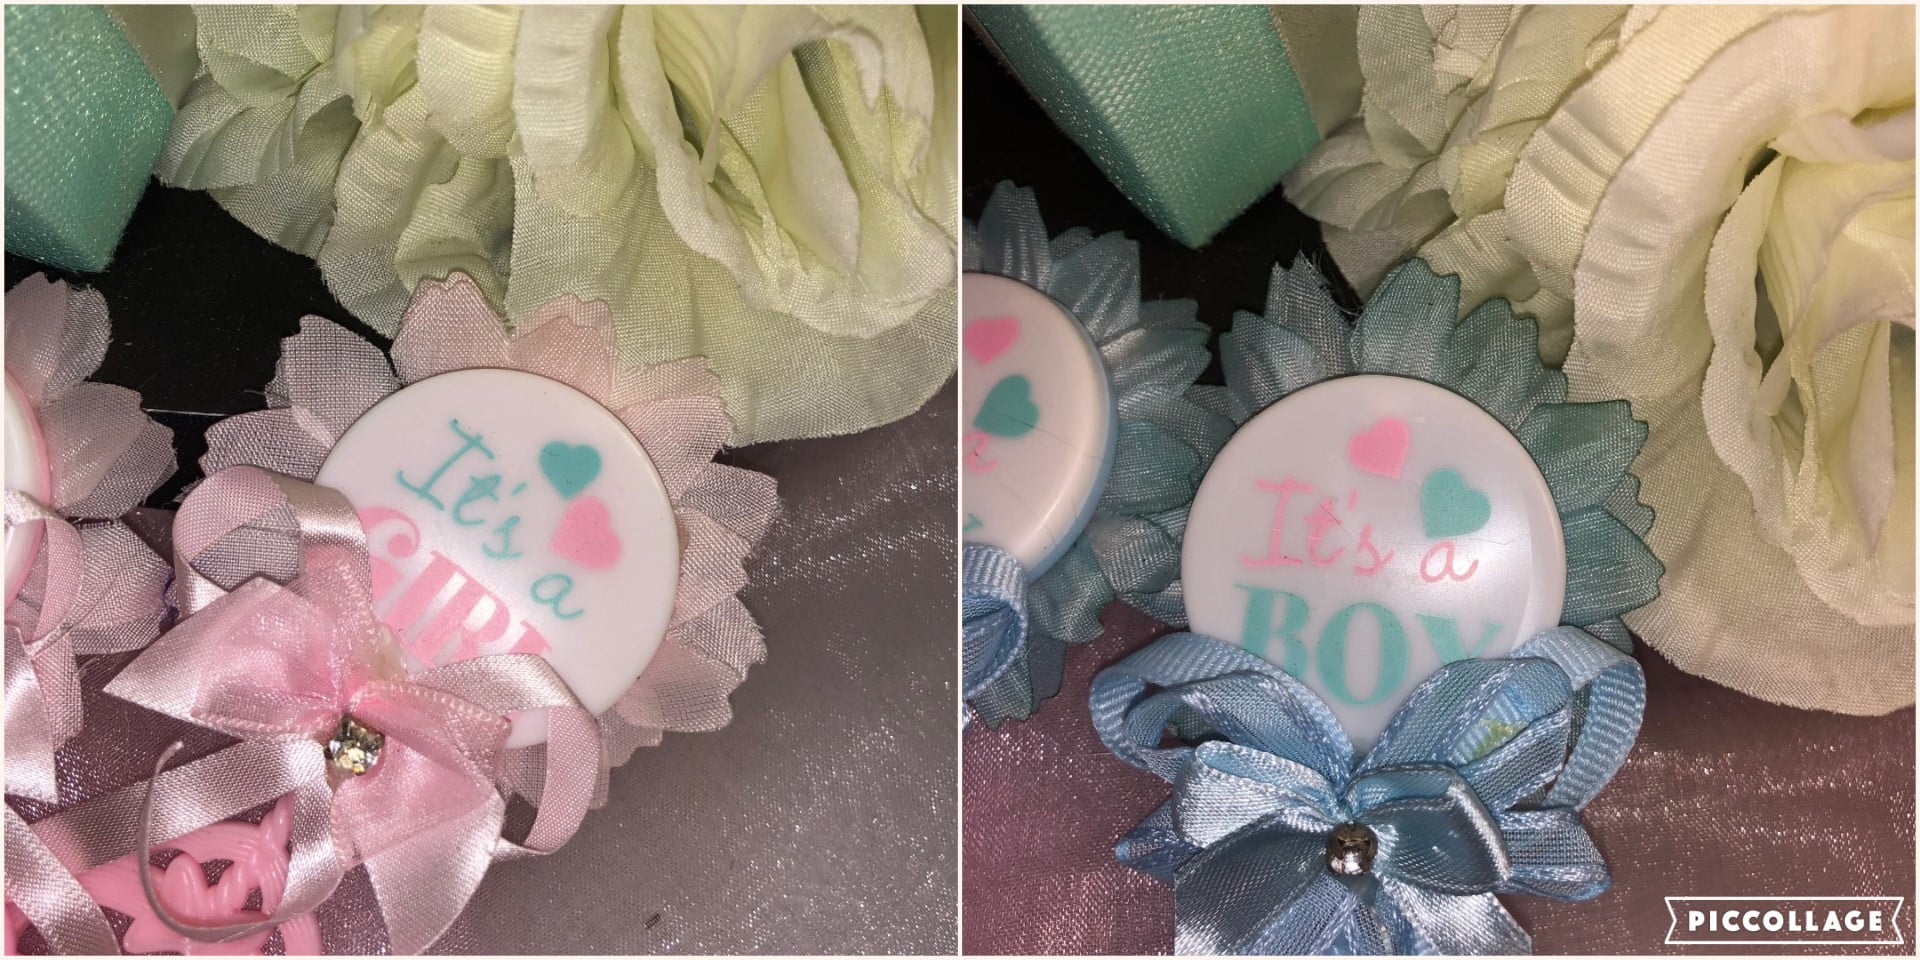 12 Baby Shower Fillable Blocks Favors Prizes It's a Girl Game Decorations 